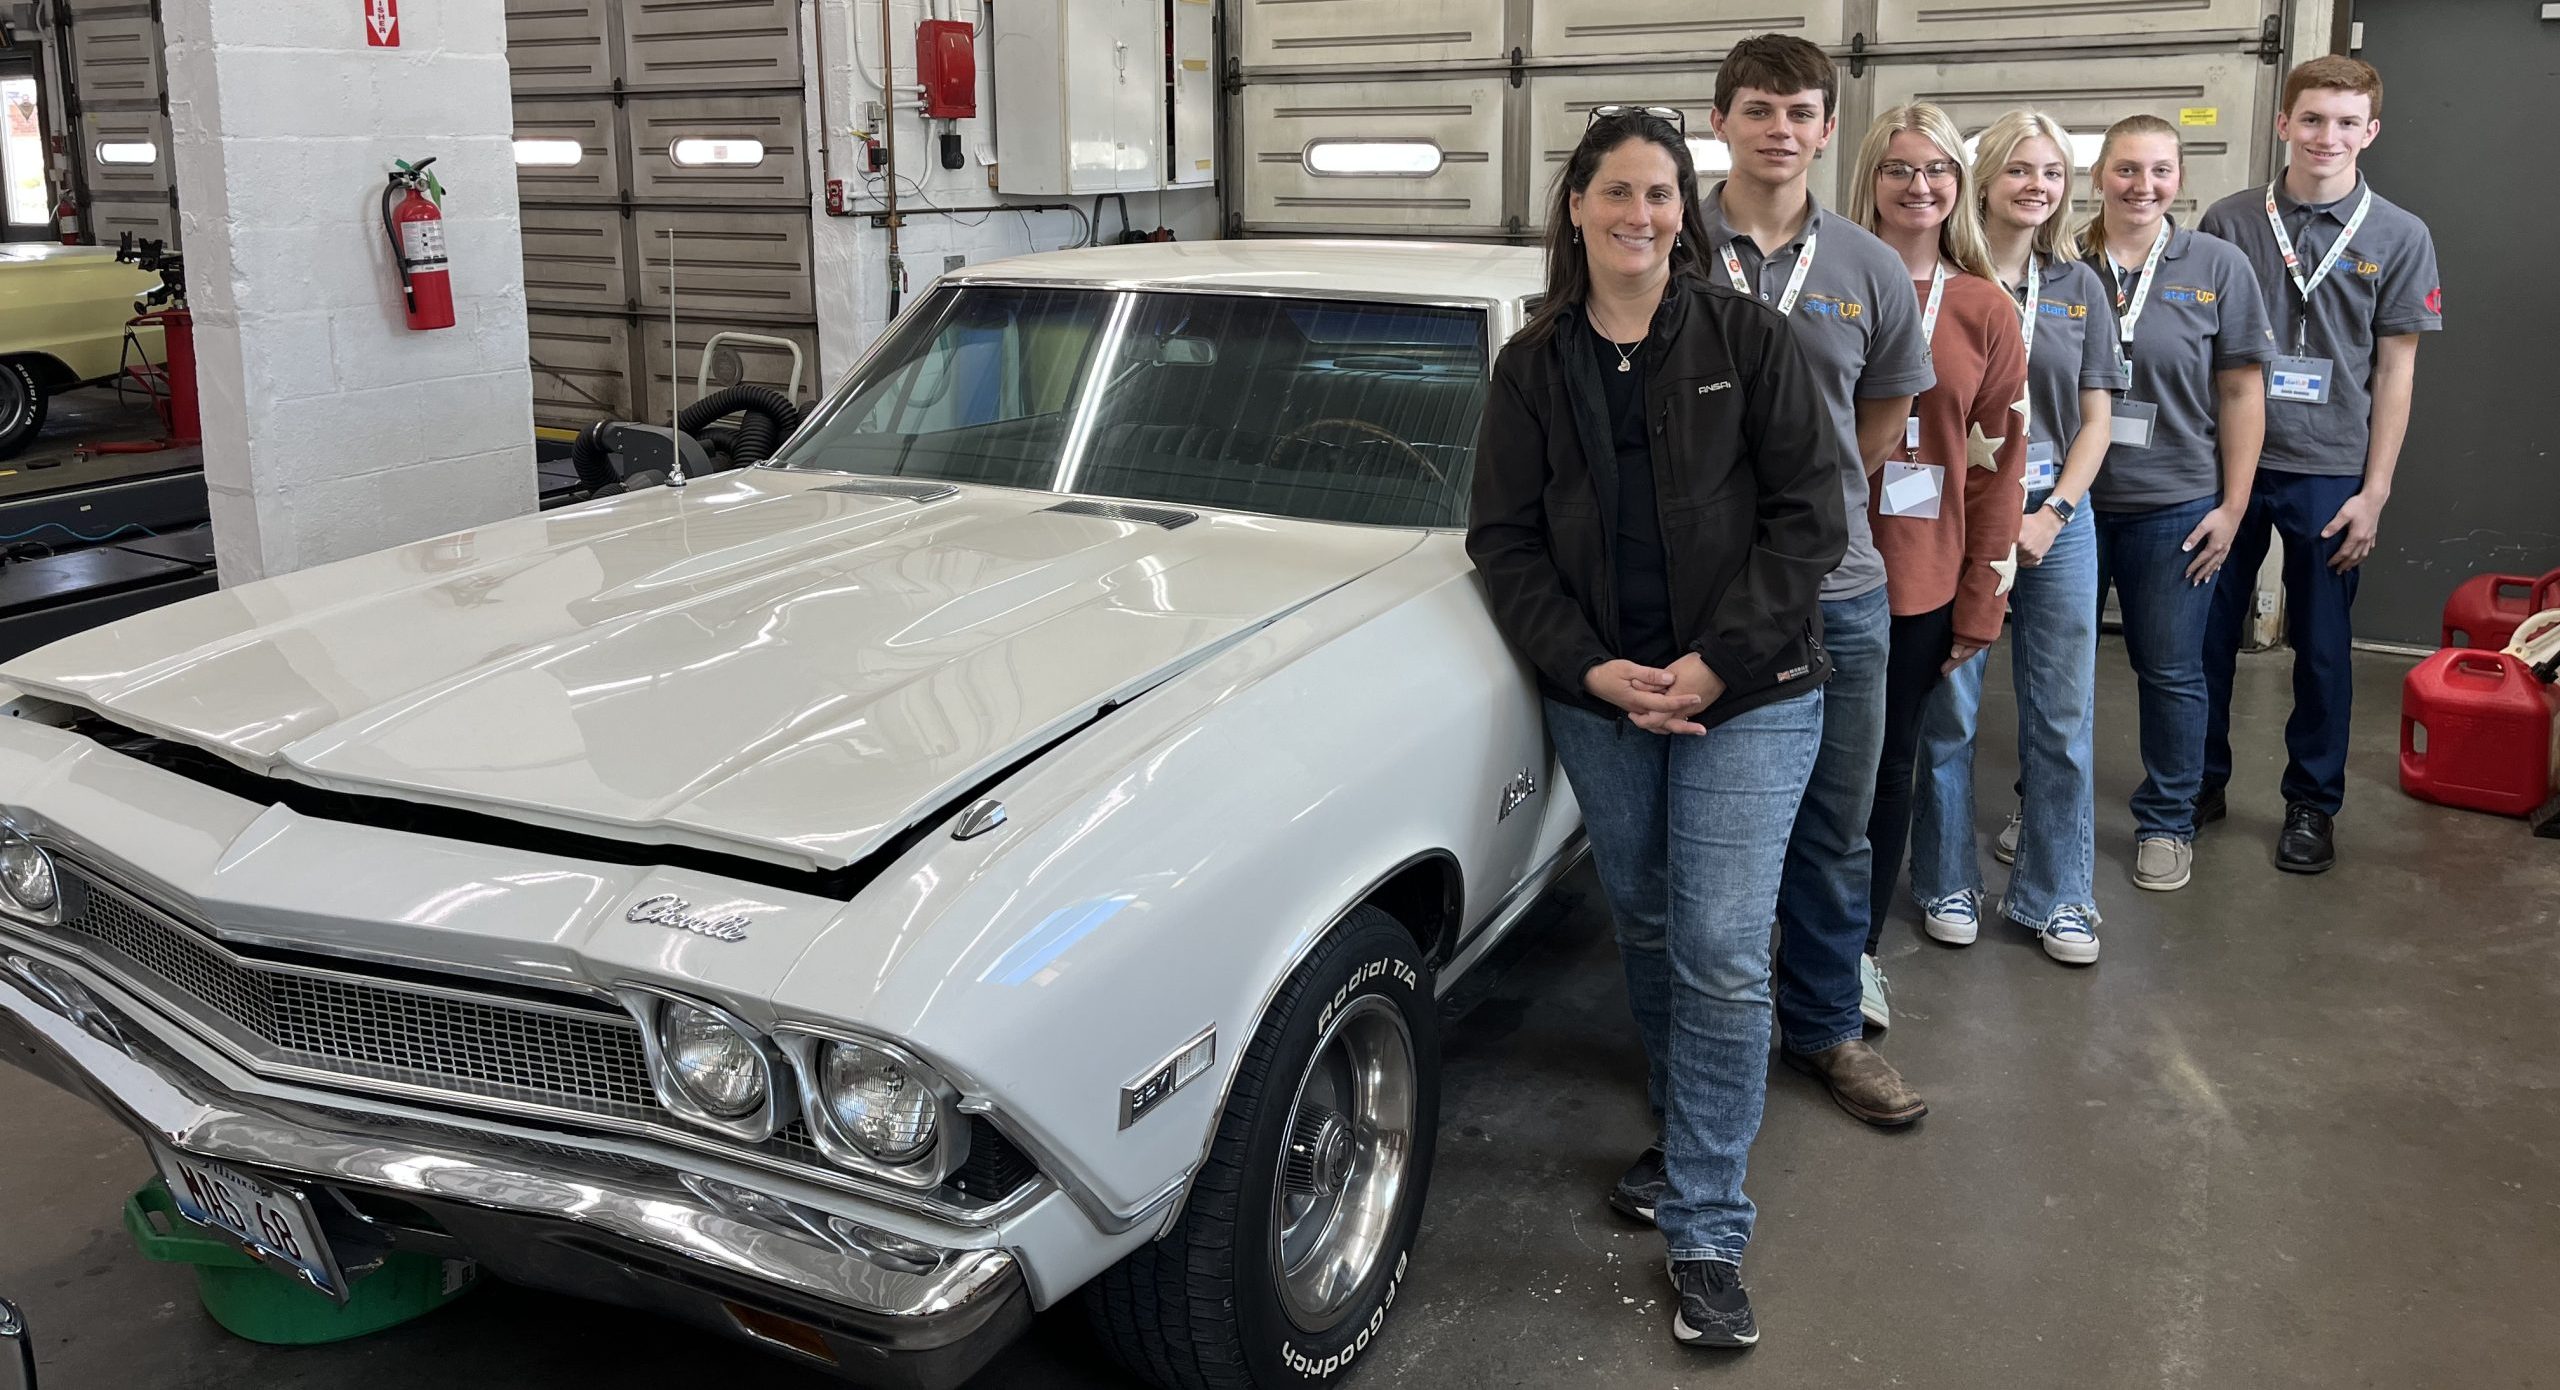 V8 Speed and Resto Shop hosted the Randolph County Start Up Program